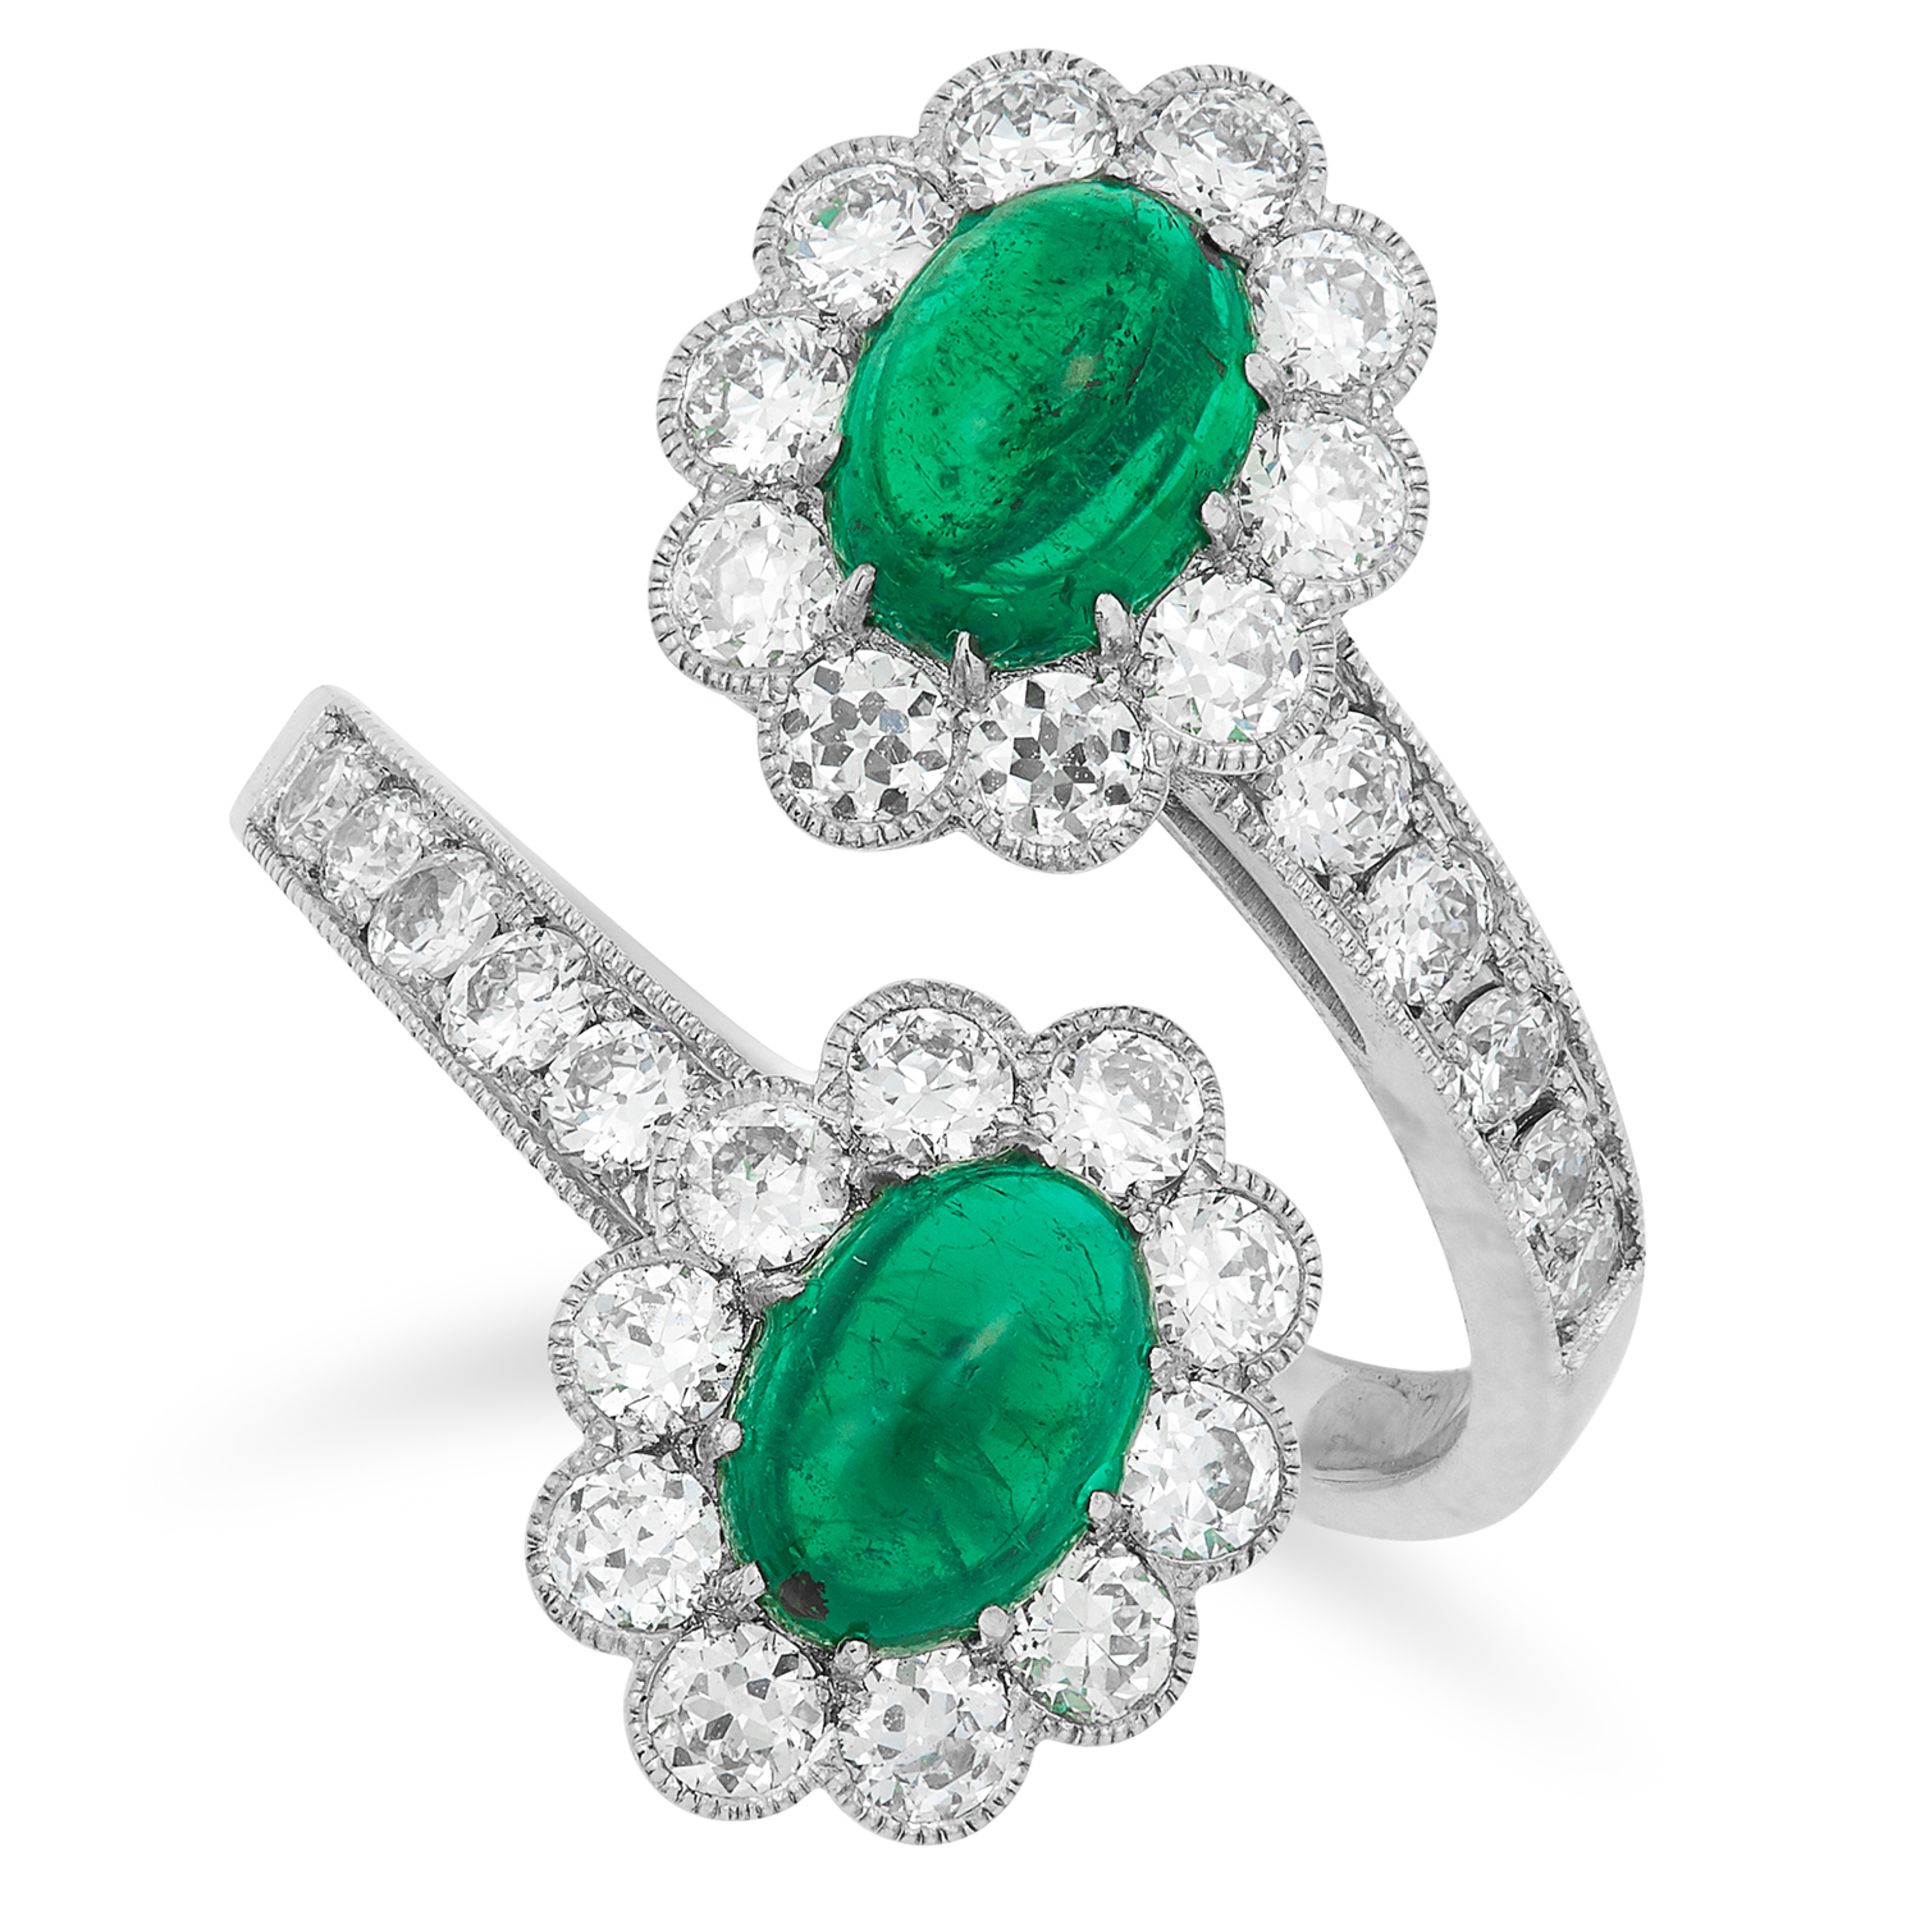 EMERALD AND DIAMOND TOI ET MOI RING set with cabochon emeralds totalling approximately 2.10 carats